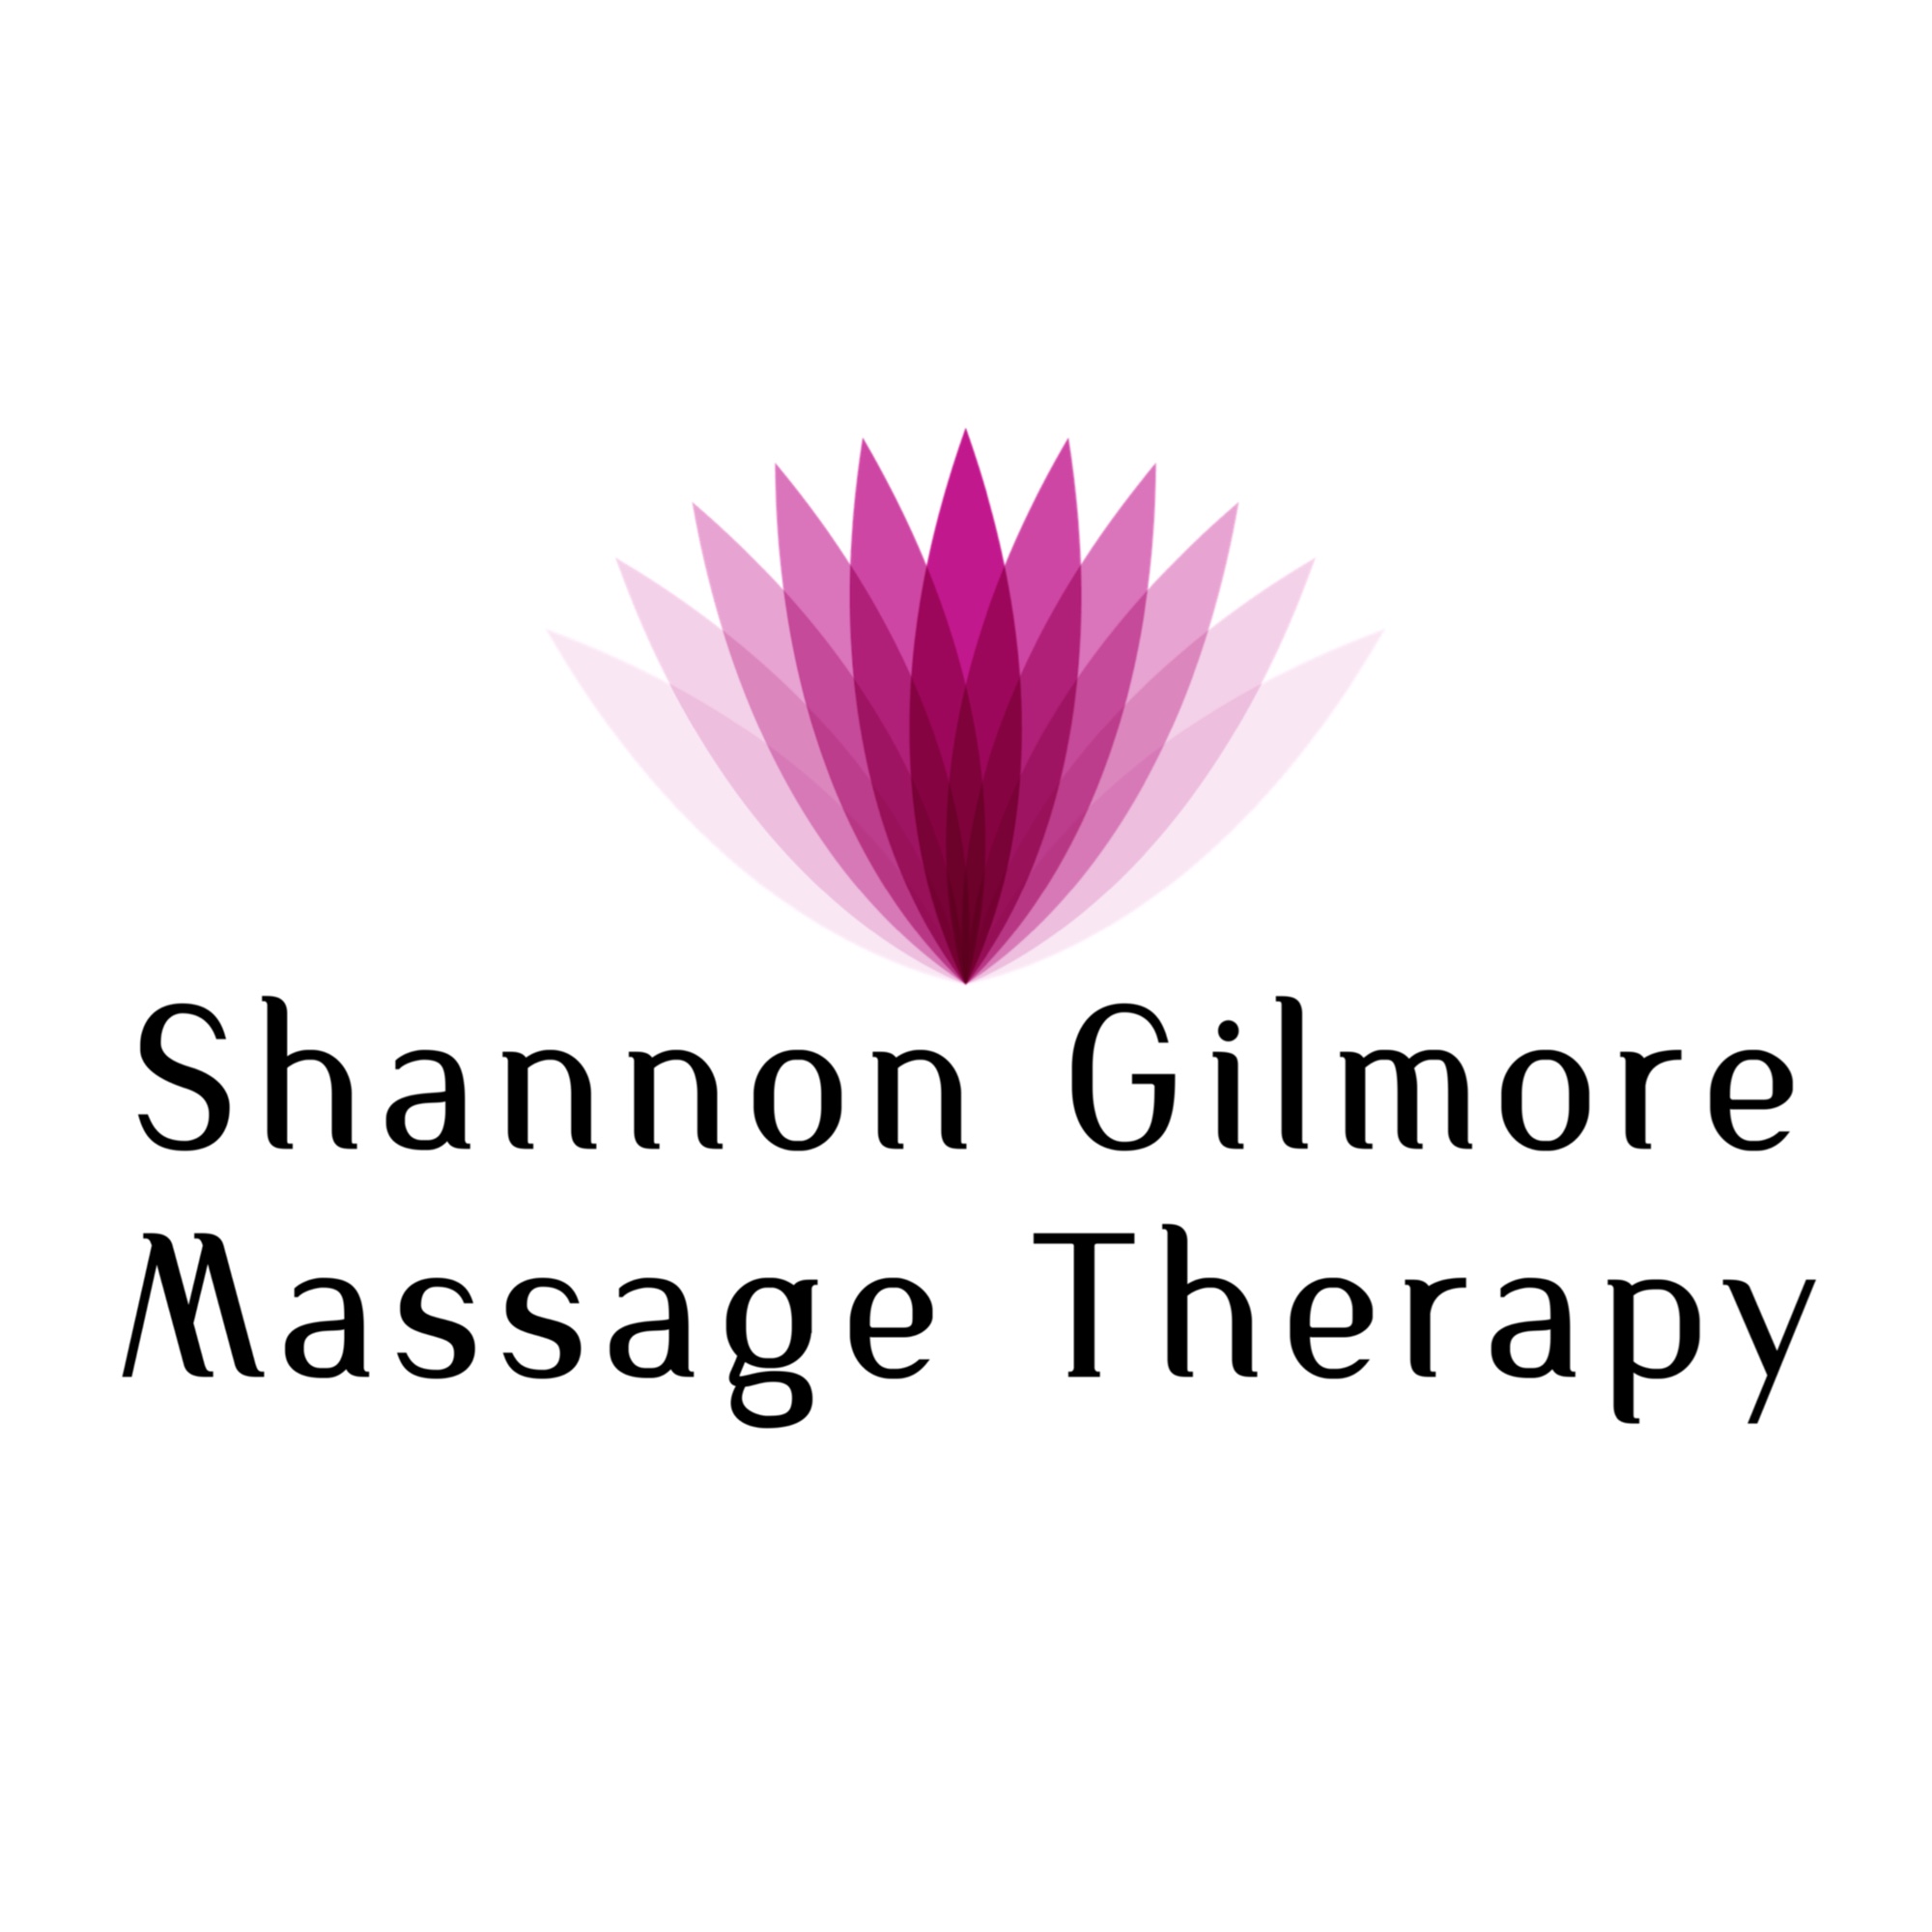 Shannon Gilmore Massage Therapy